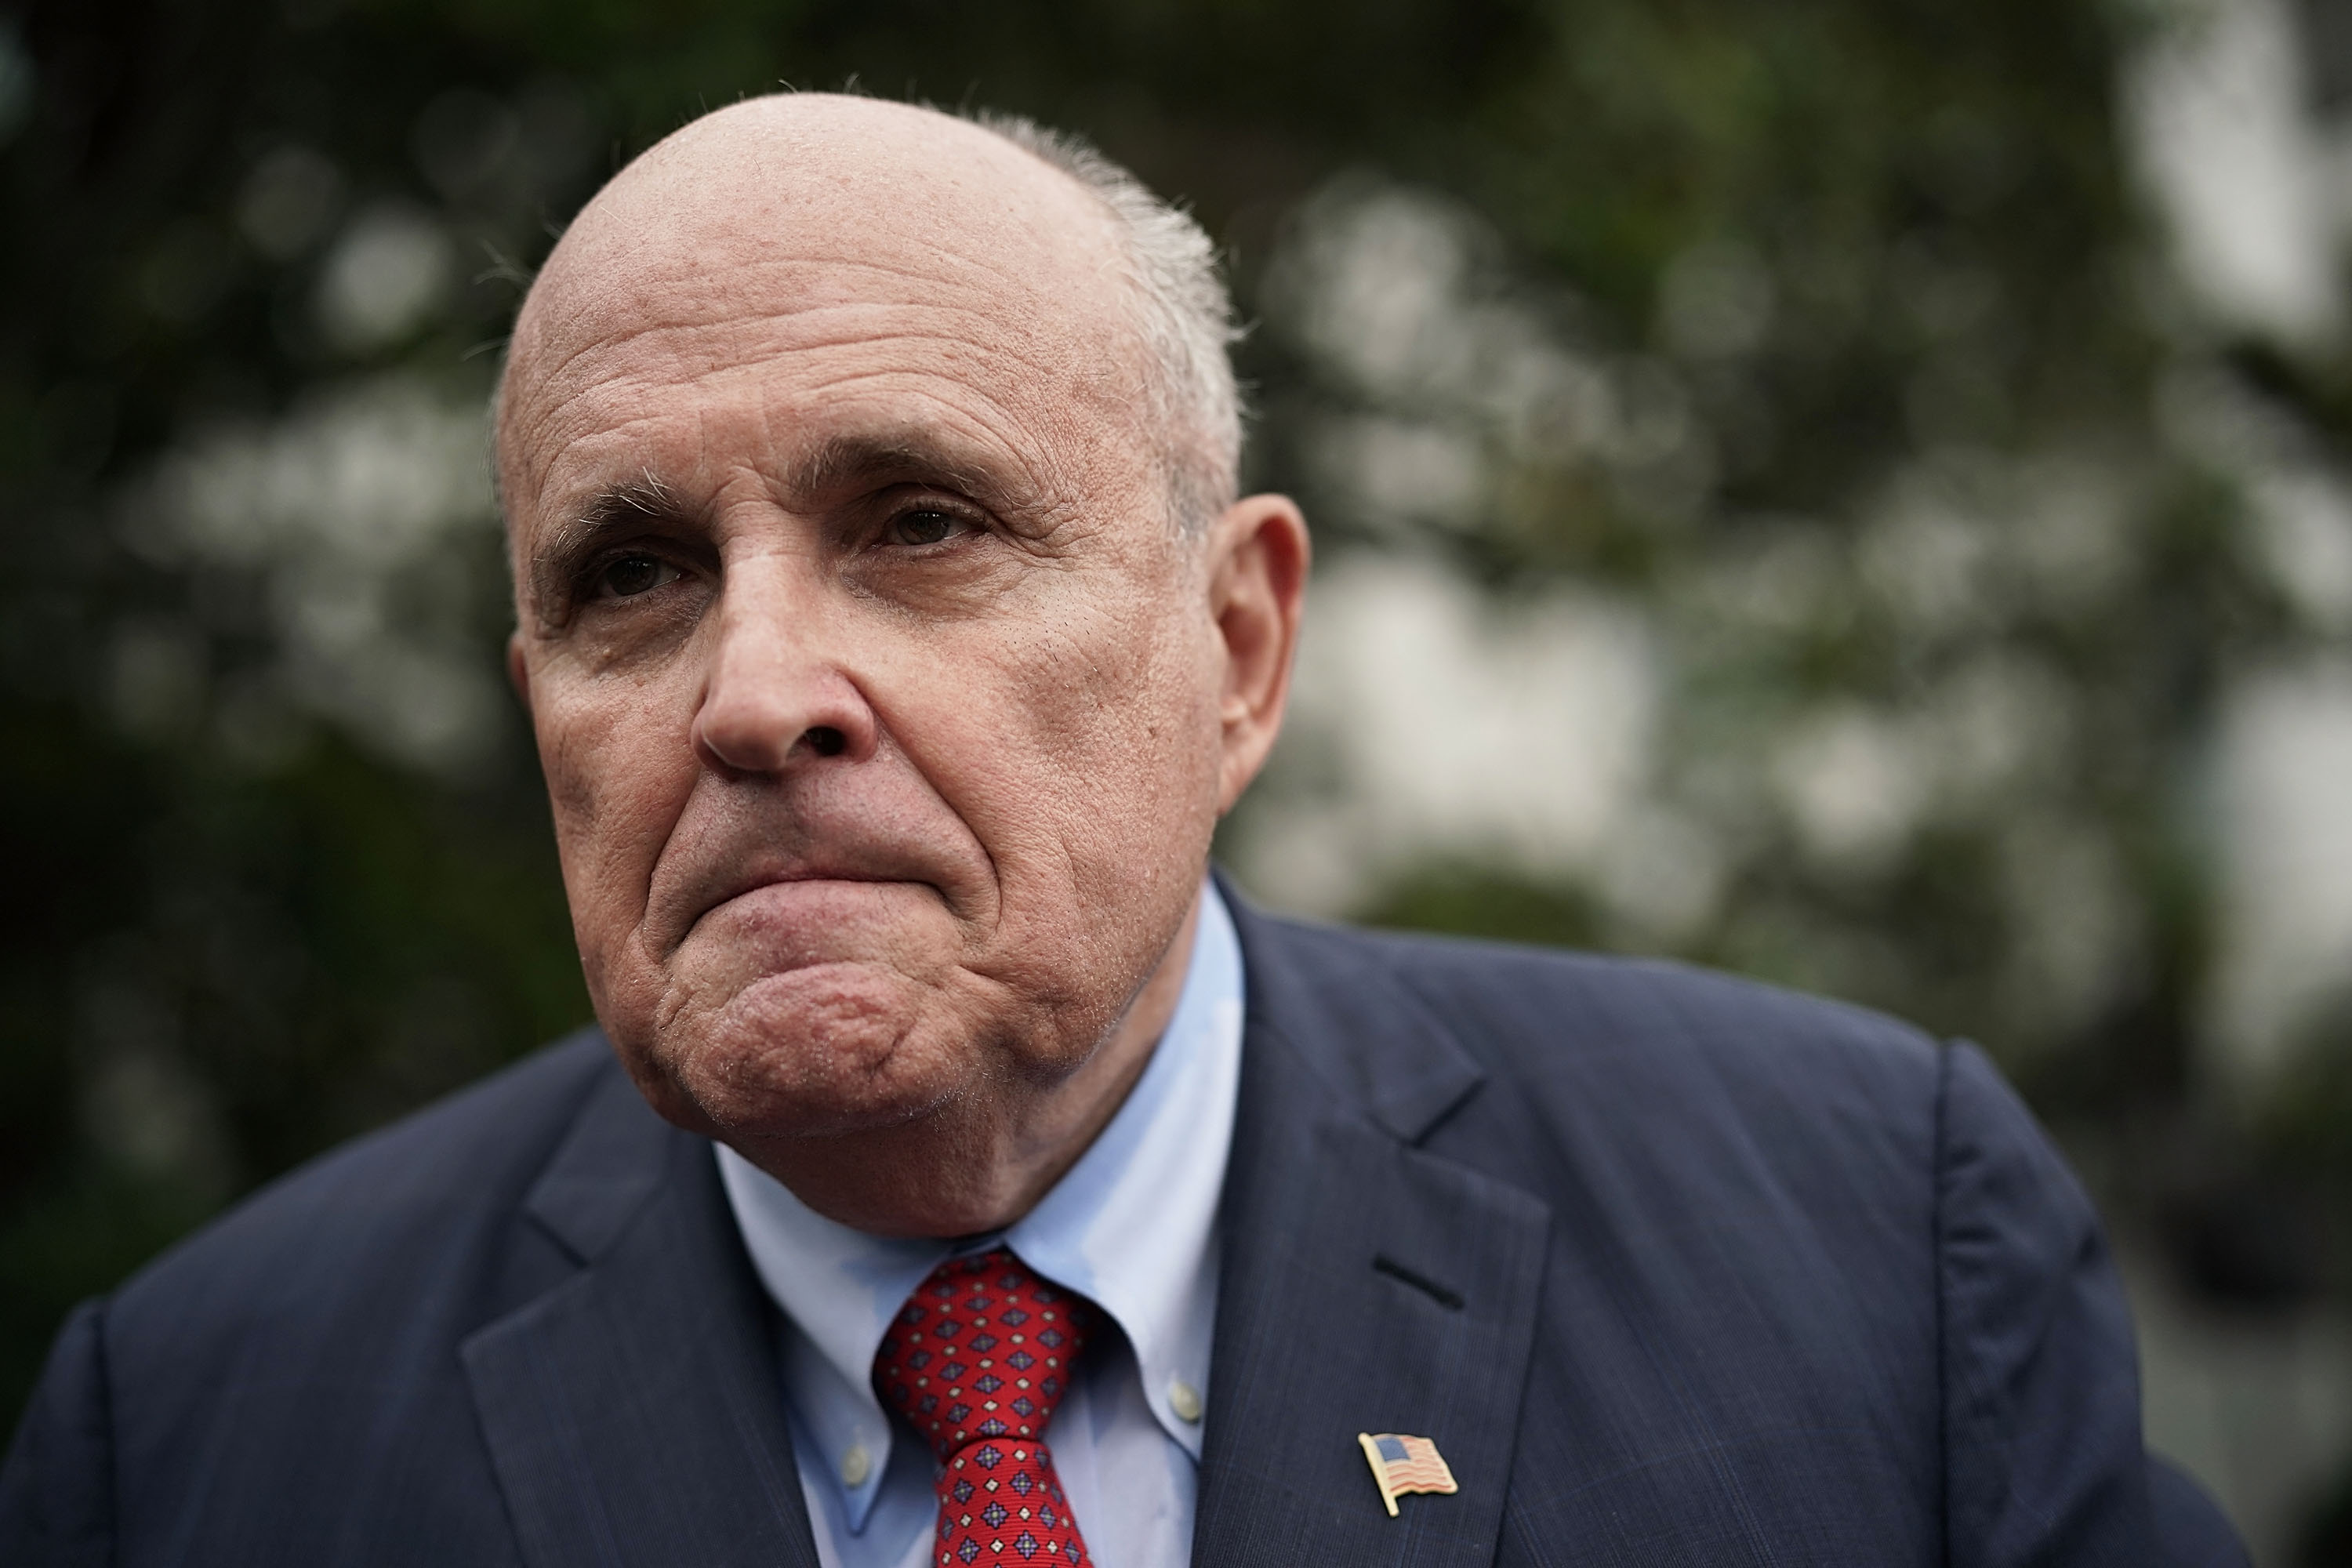 Rudy Giuliani, former New York City mayor and current lawyer for President Donald Trump, at the White House on May 30, 2018.